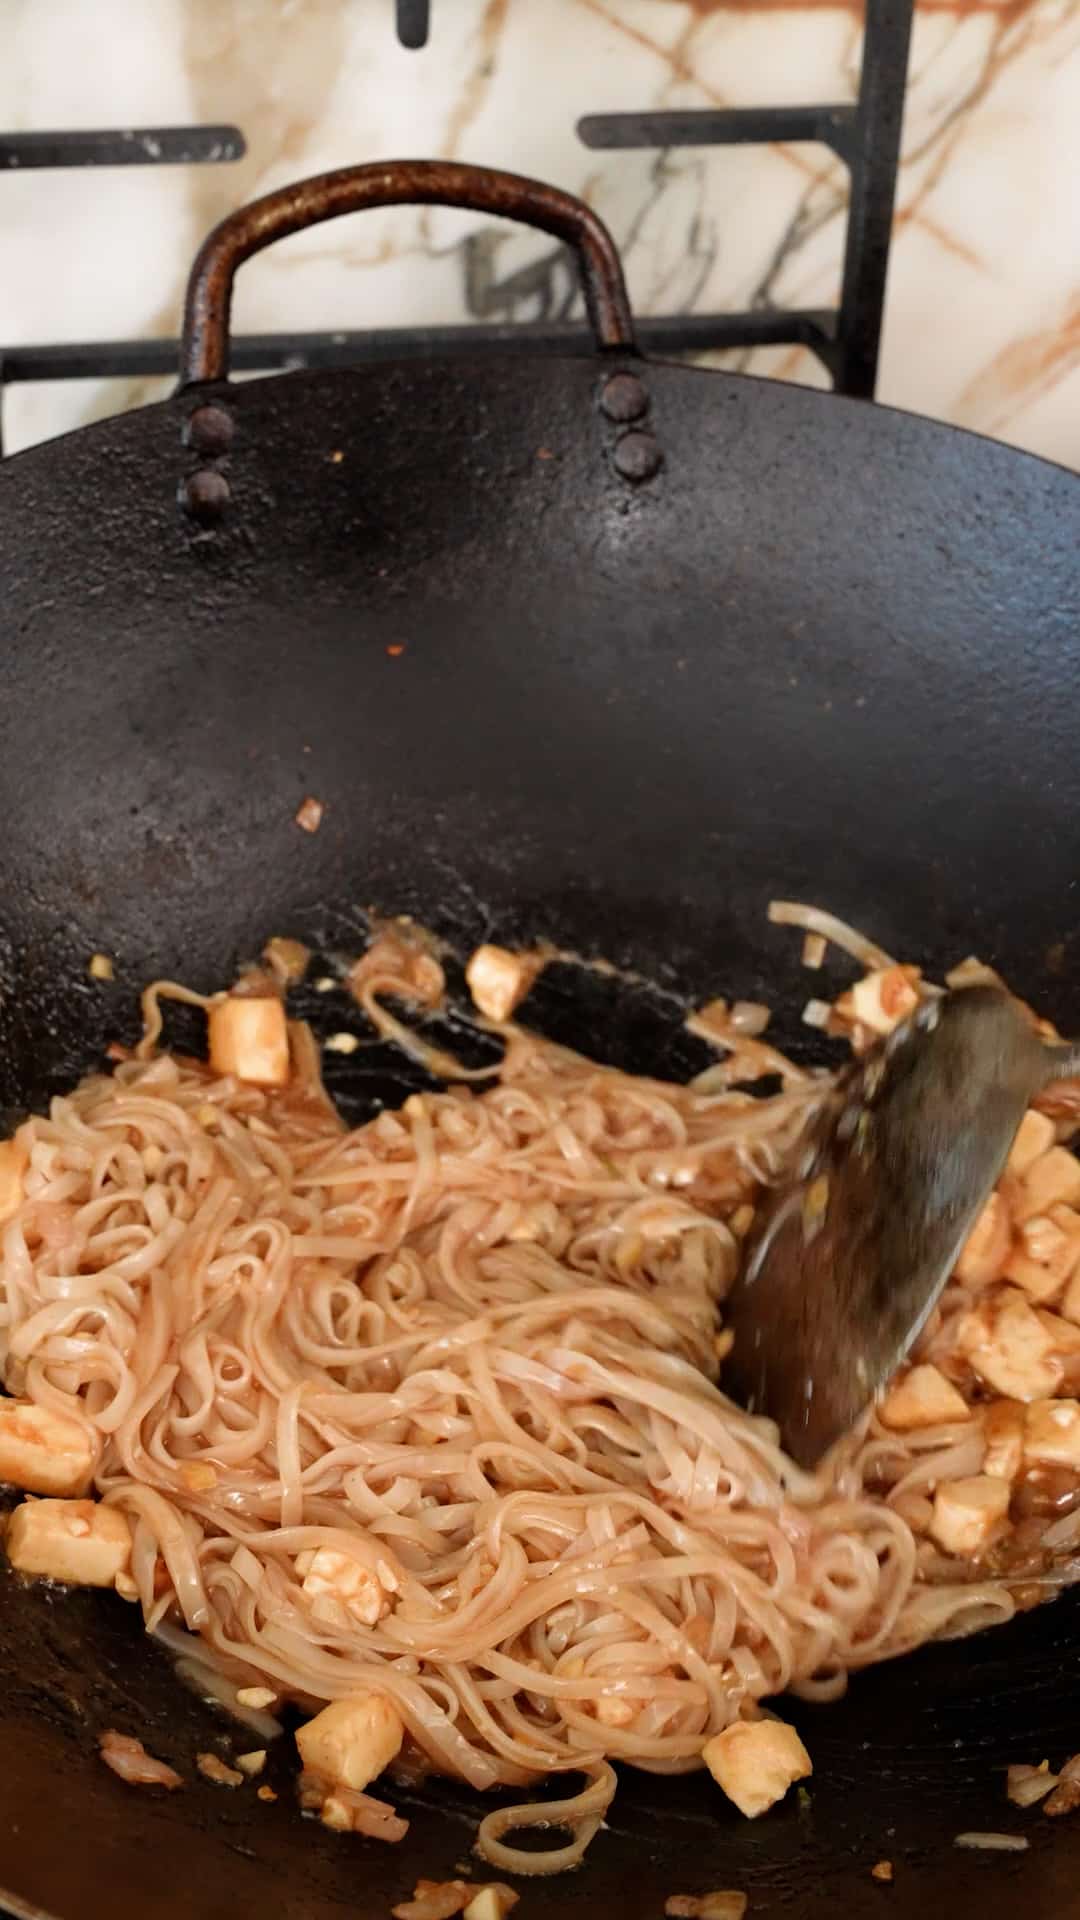 Pad thai noodles combined with pad thai sauce in a wok.